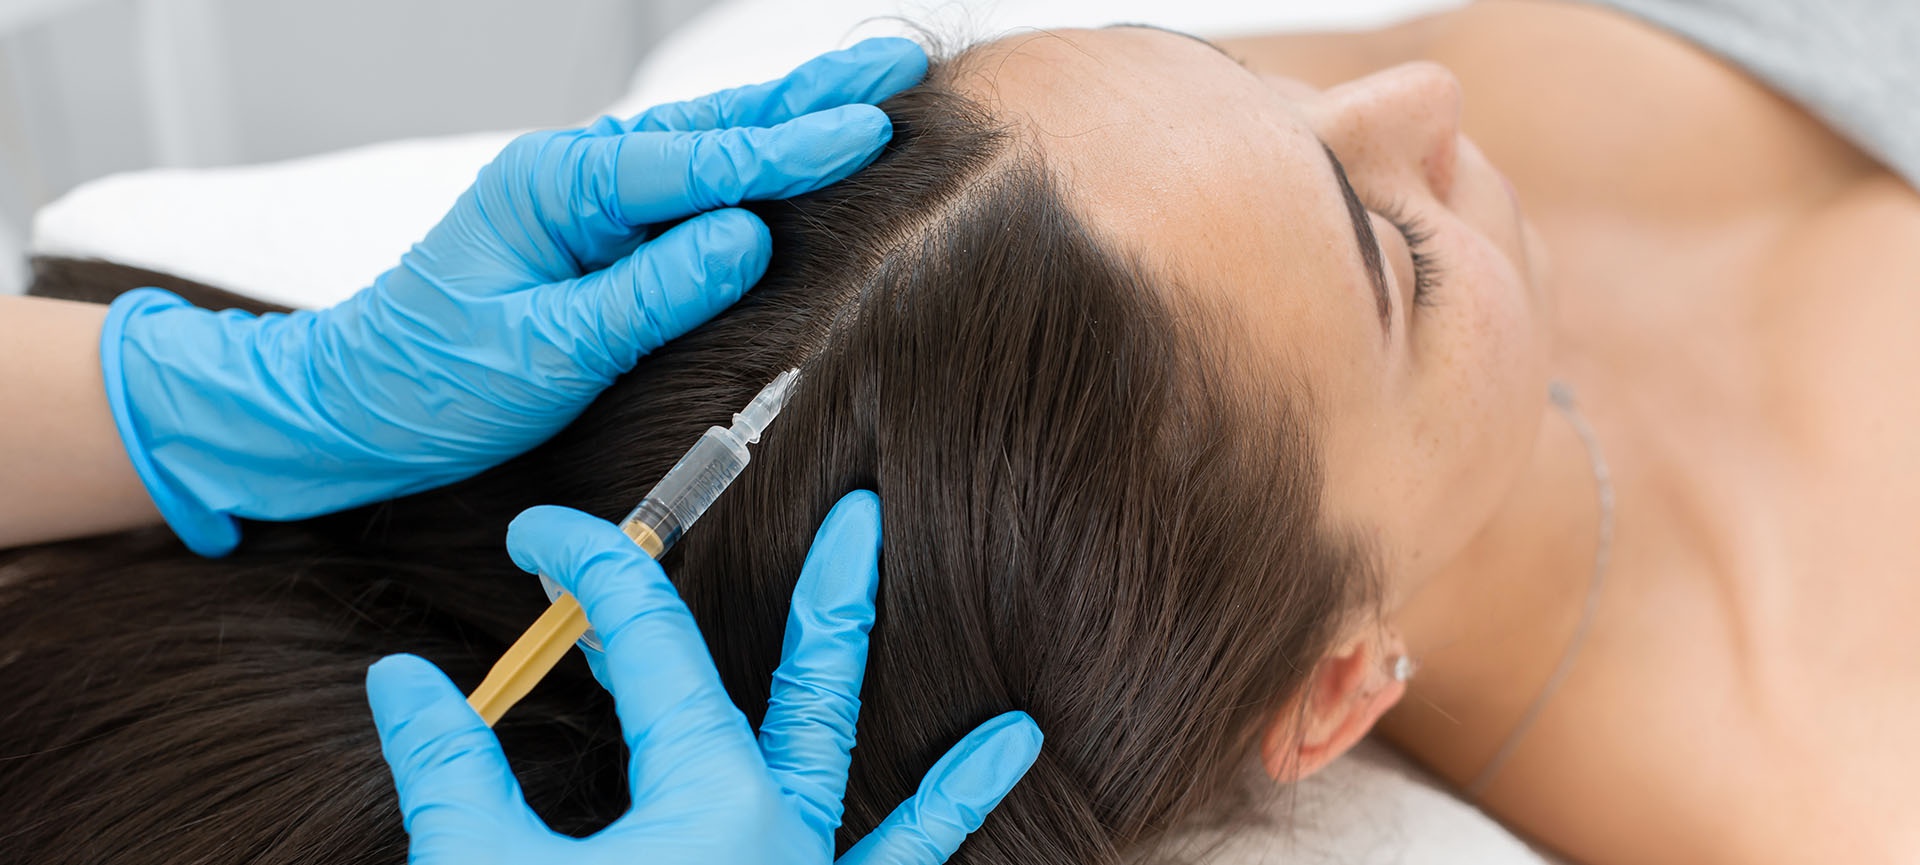 PRP Hair Treatments – What is it & Why You Should Consider It?